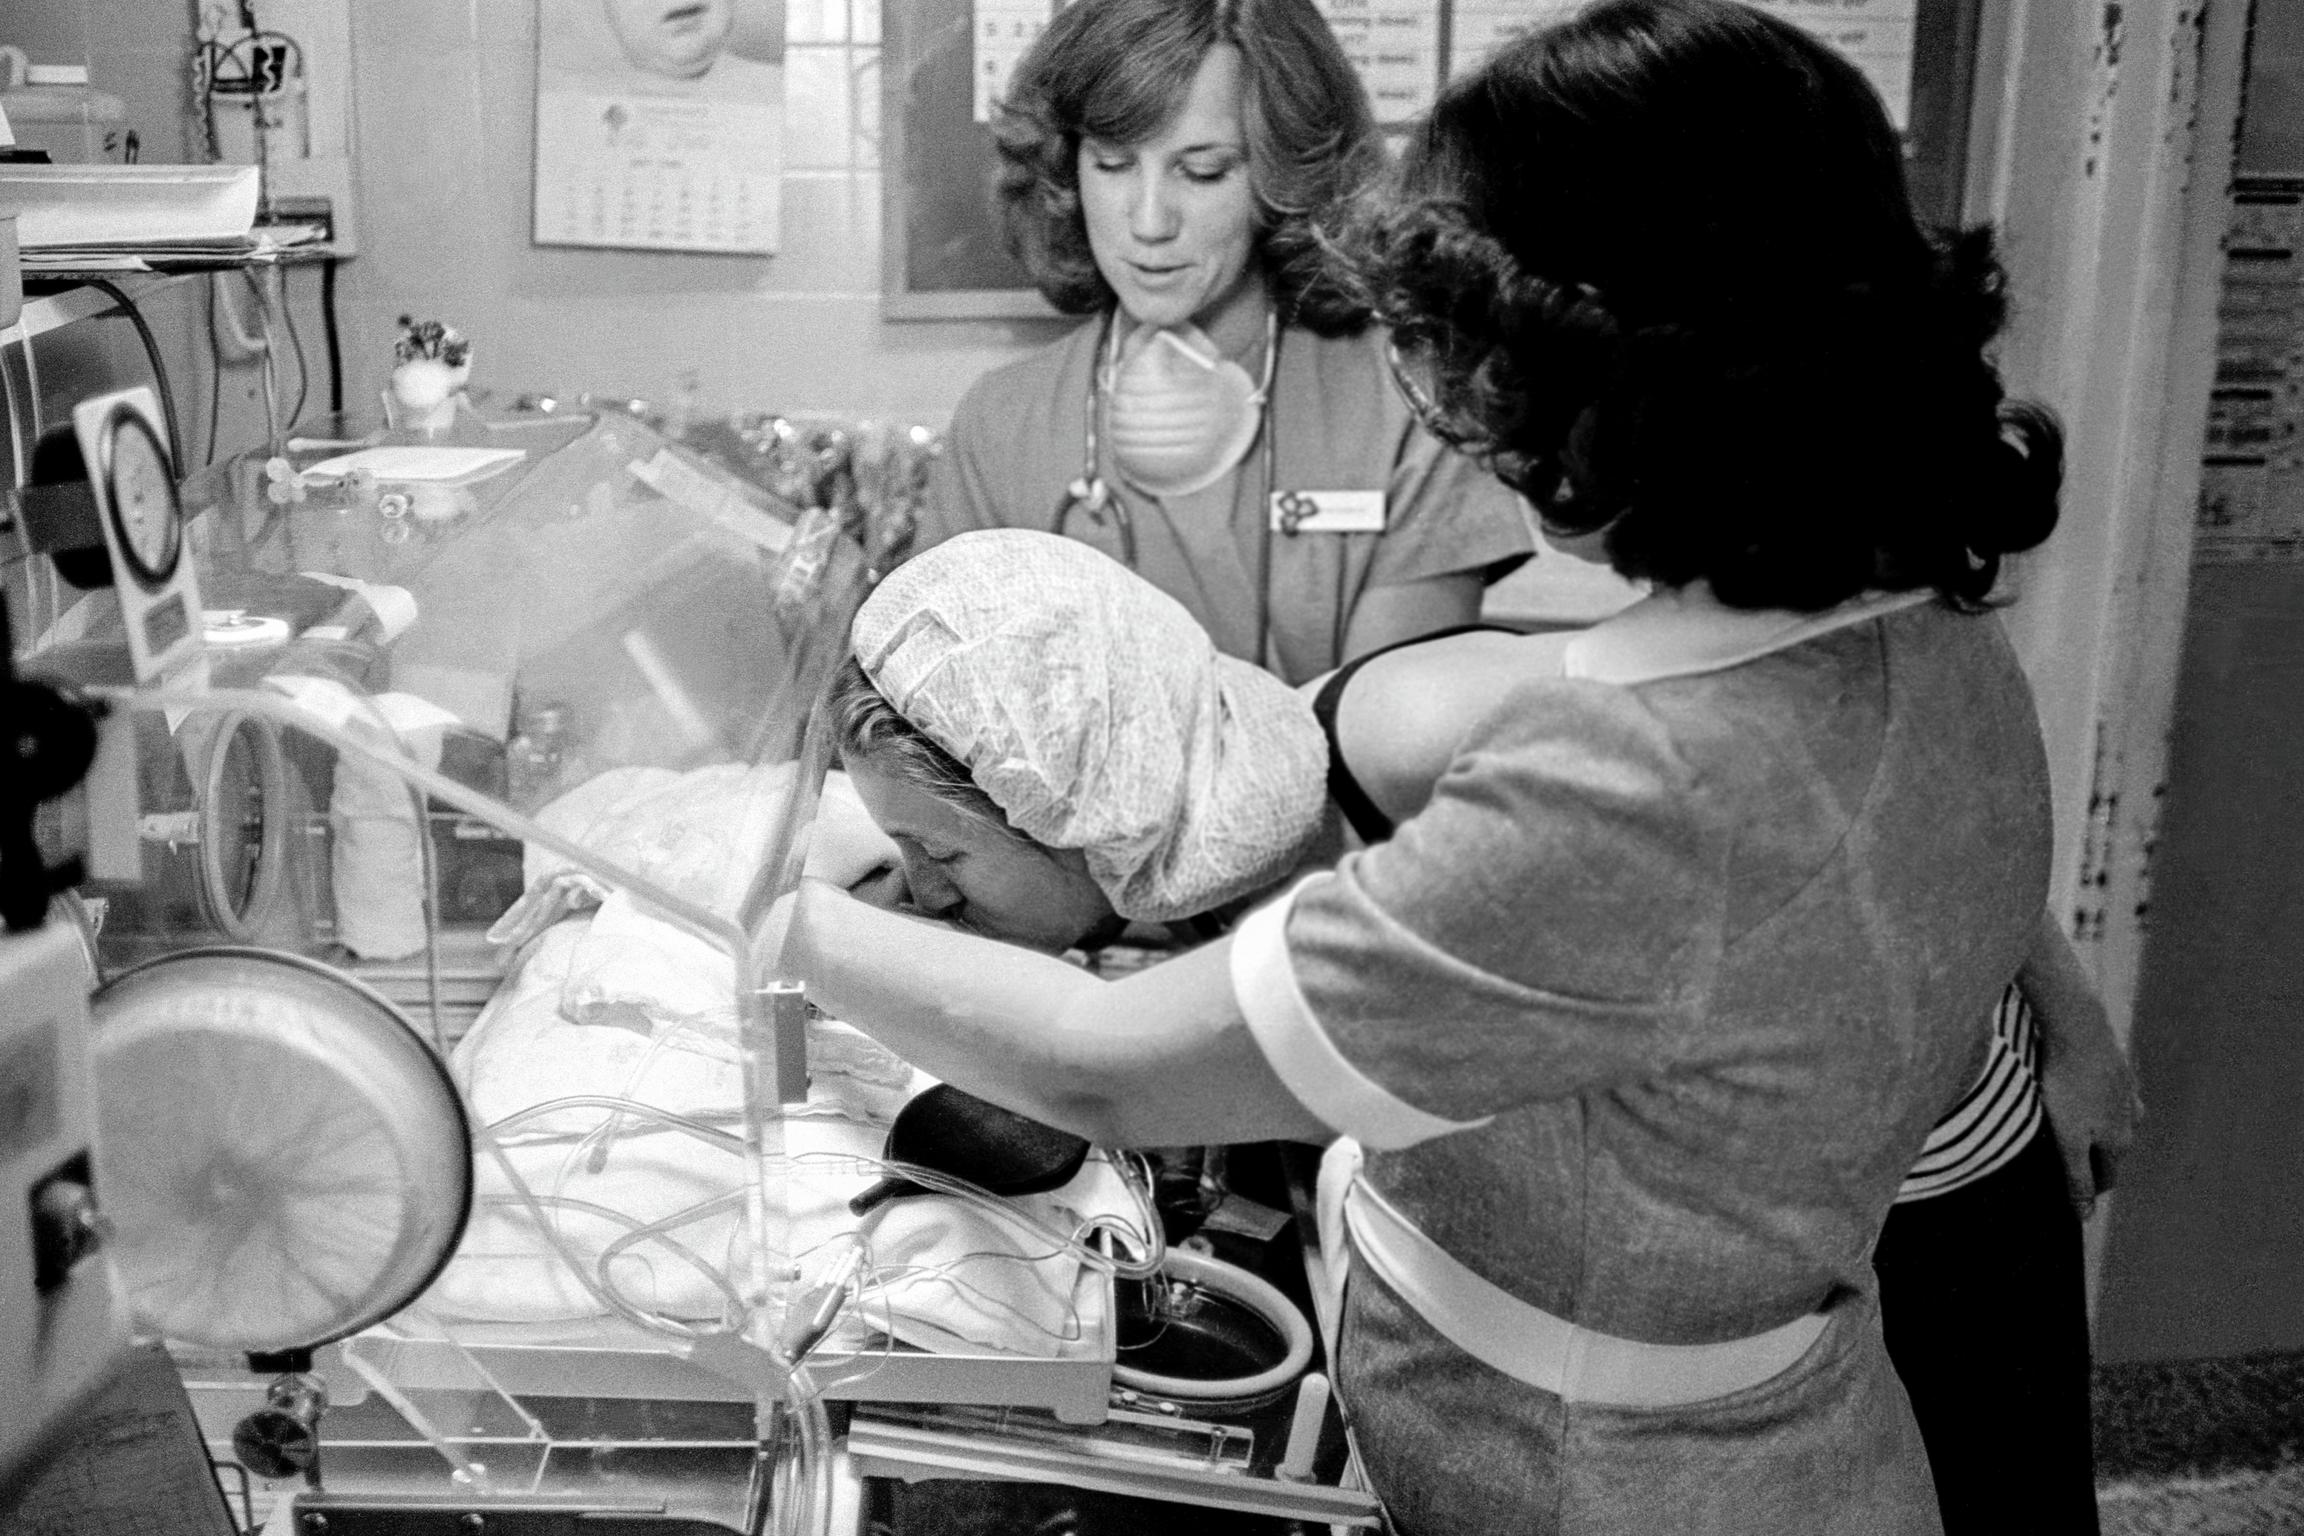 Preemie Baby unit at St Joseph's Hospital. The mother feels much closer to her daughter after the nurses opened the incubator (I.C.U.) for a kiss. Phoenix, Arizona USA